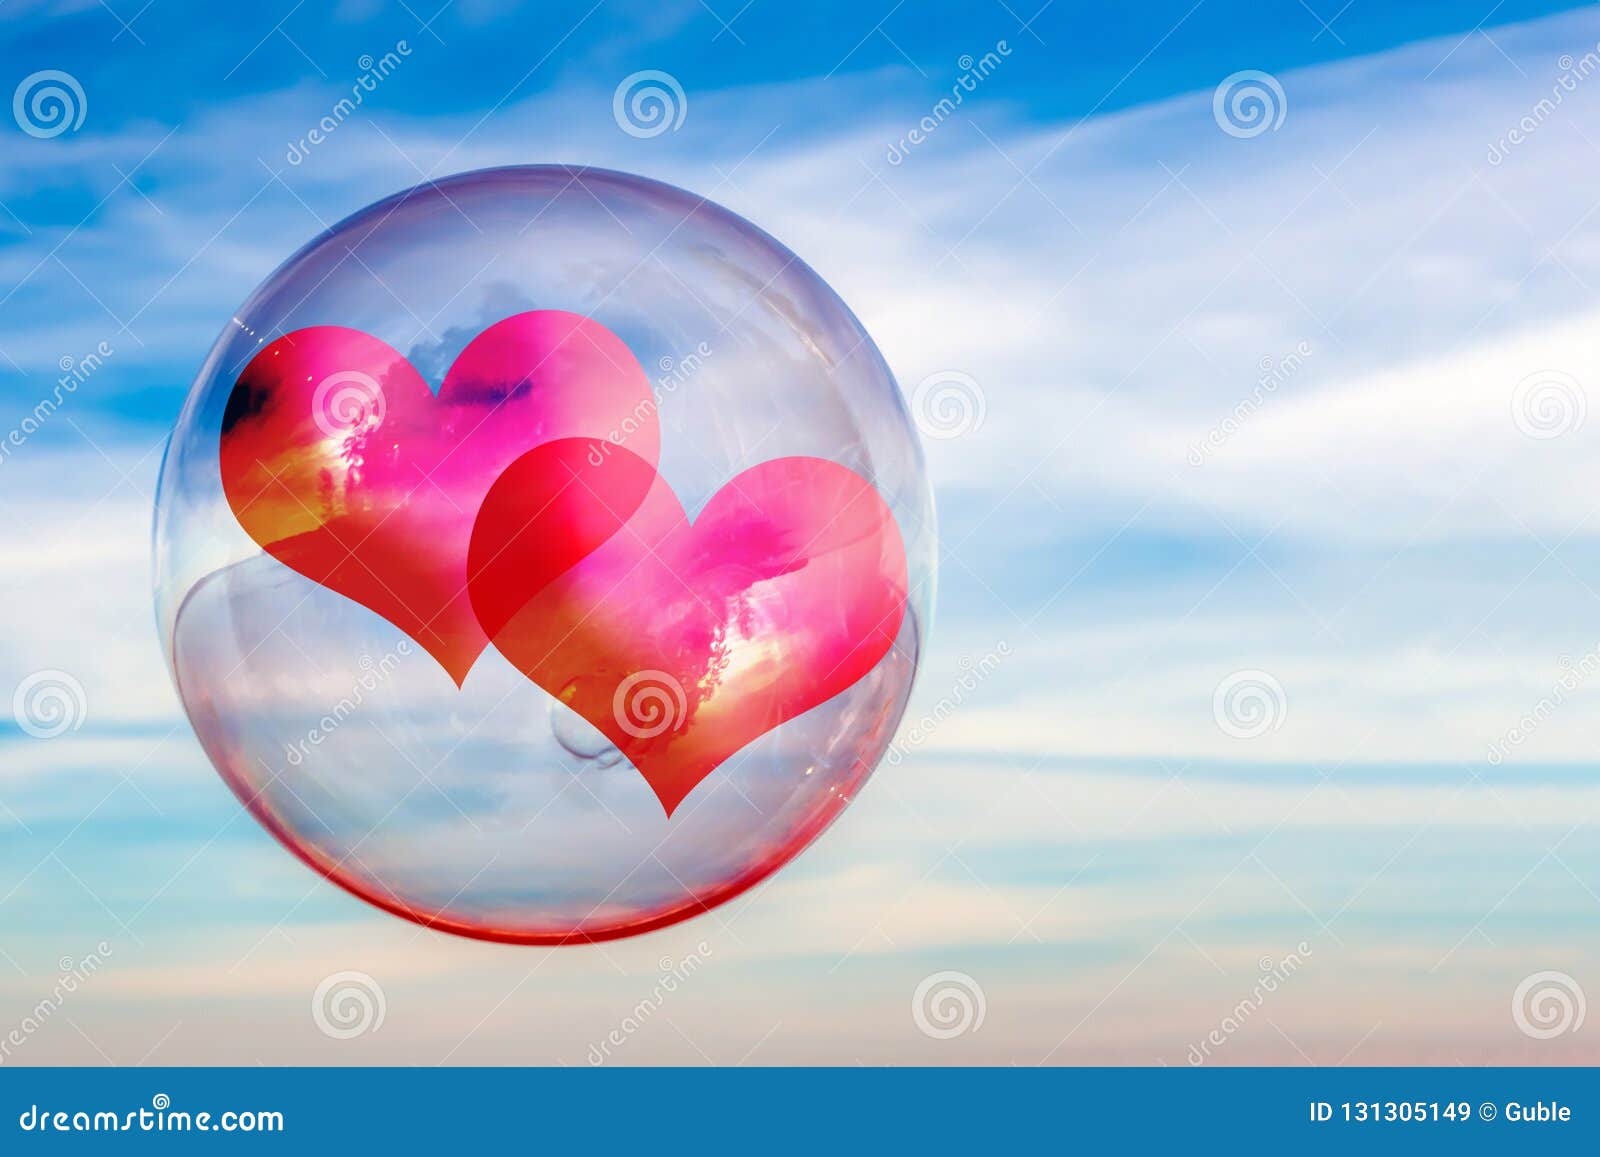 Two Hearts in a Soap Bubble Against the Sky. Concept of the Relationship of  a Couple in Love. Abstract Background. Stock Image - Image of flying,  holiday: 131305149